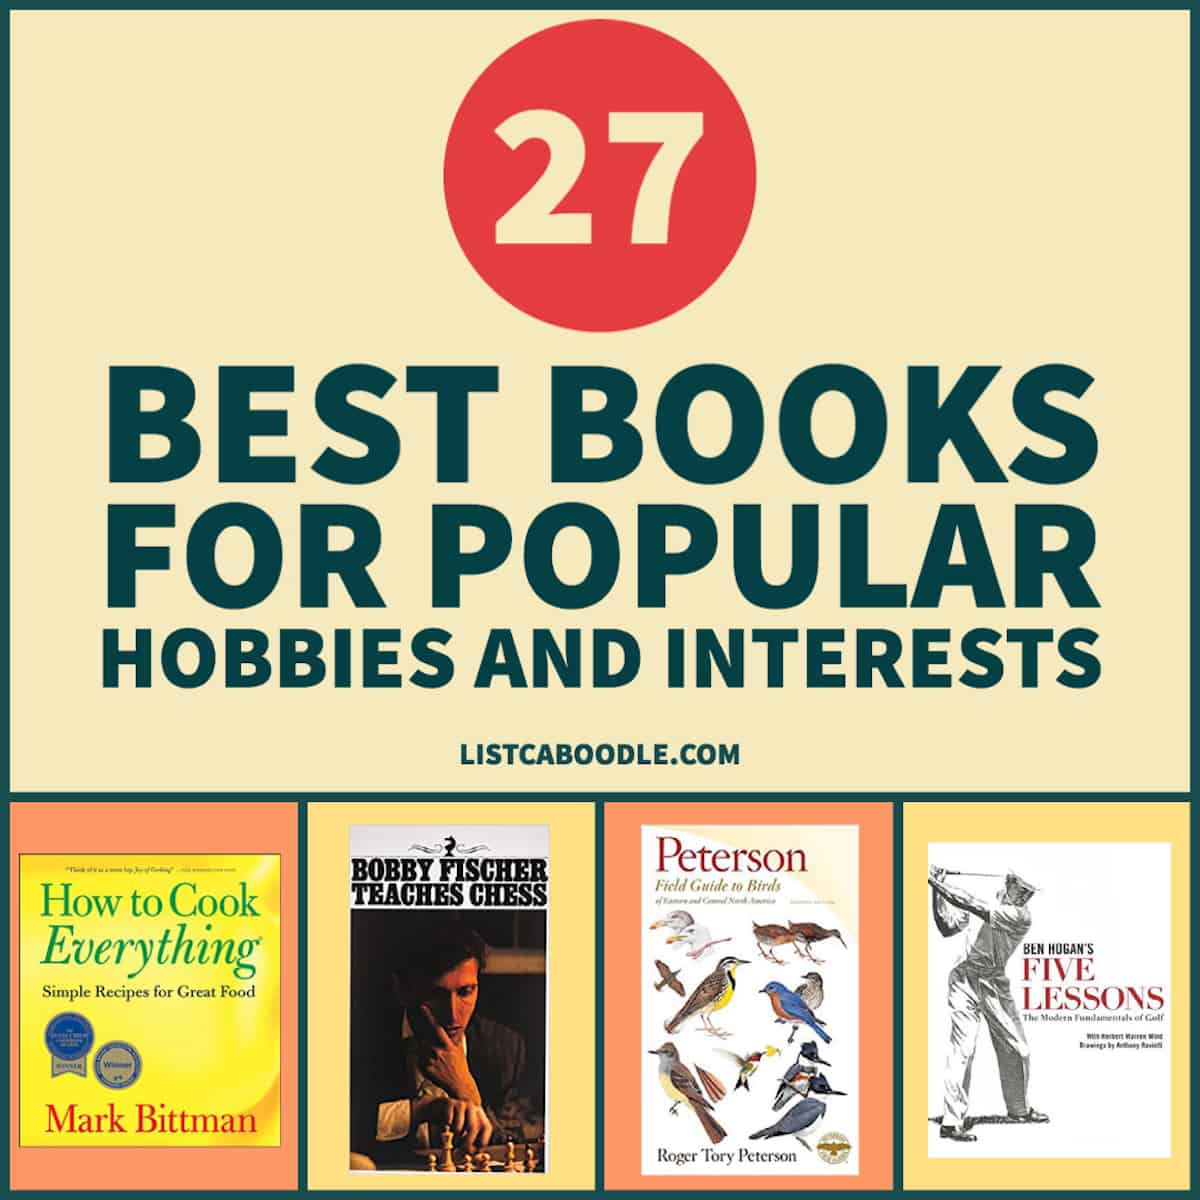 27 Best Books for Popular Hobbies and Interests